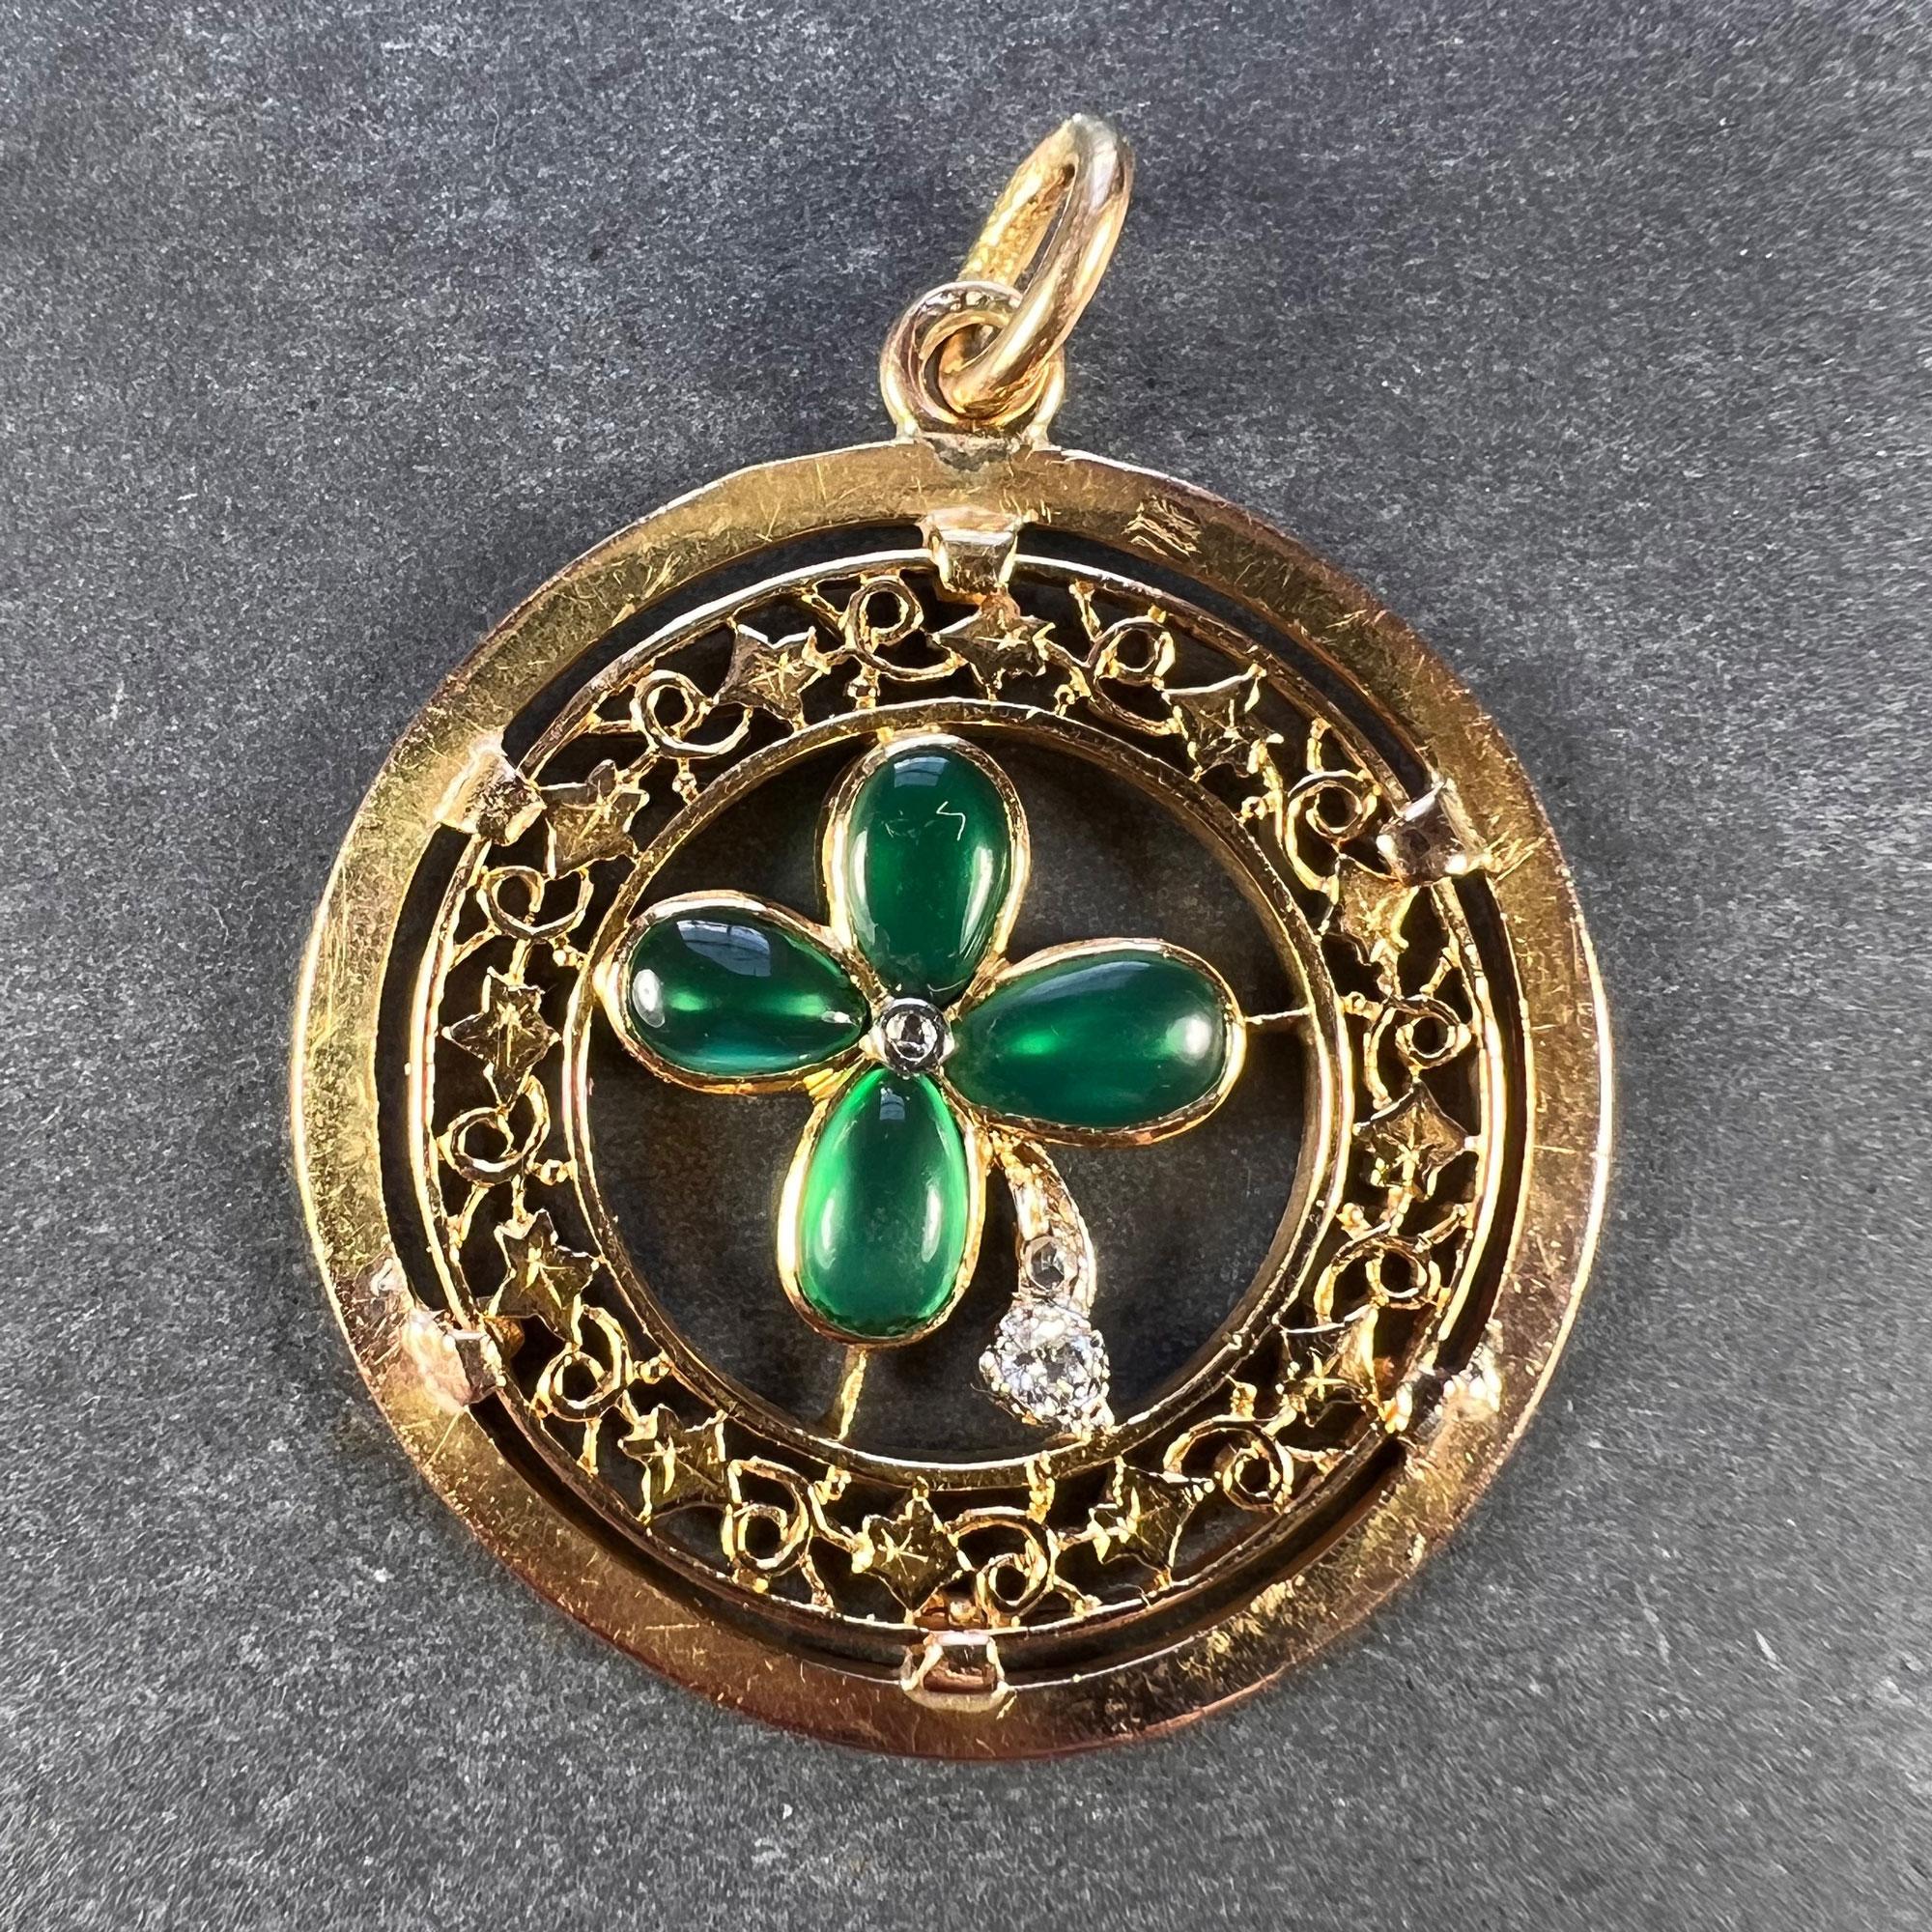 An 18 karat (18K) yellow gold charm pendant designed as a lucky four-leaf clover or shamrock with four cabochon green agate leaves centring a rose cut diamond, and a diamond set stem (total 0.07 carats), within a pierced circular frame of ivy